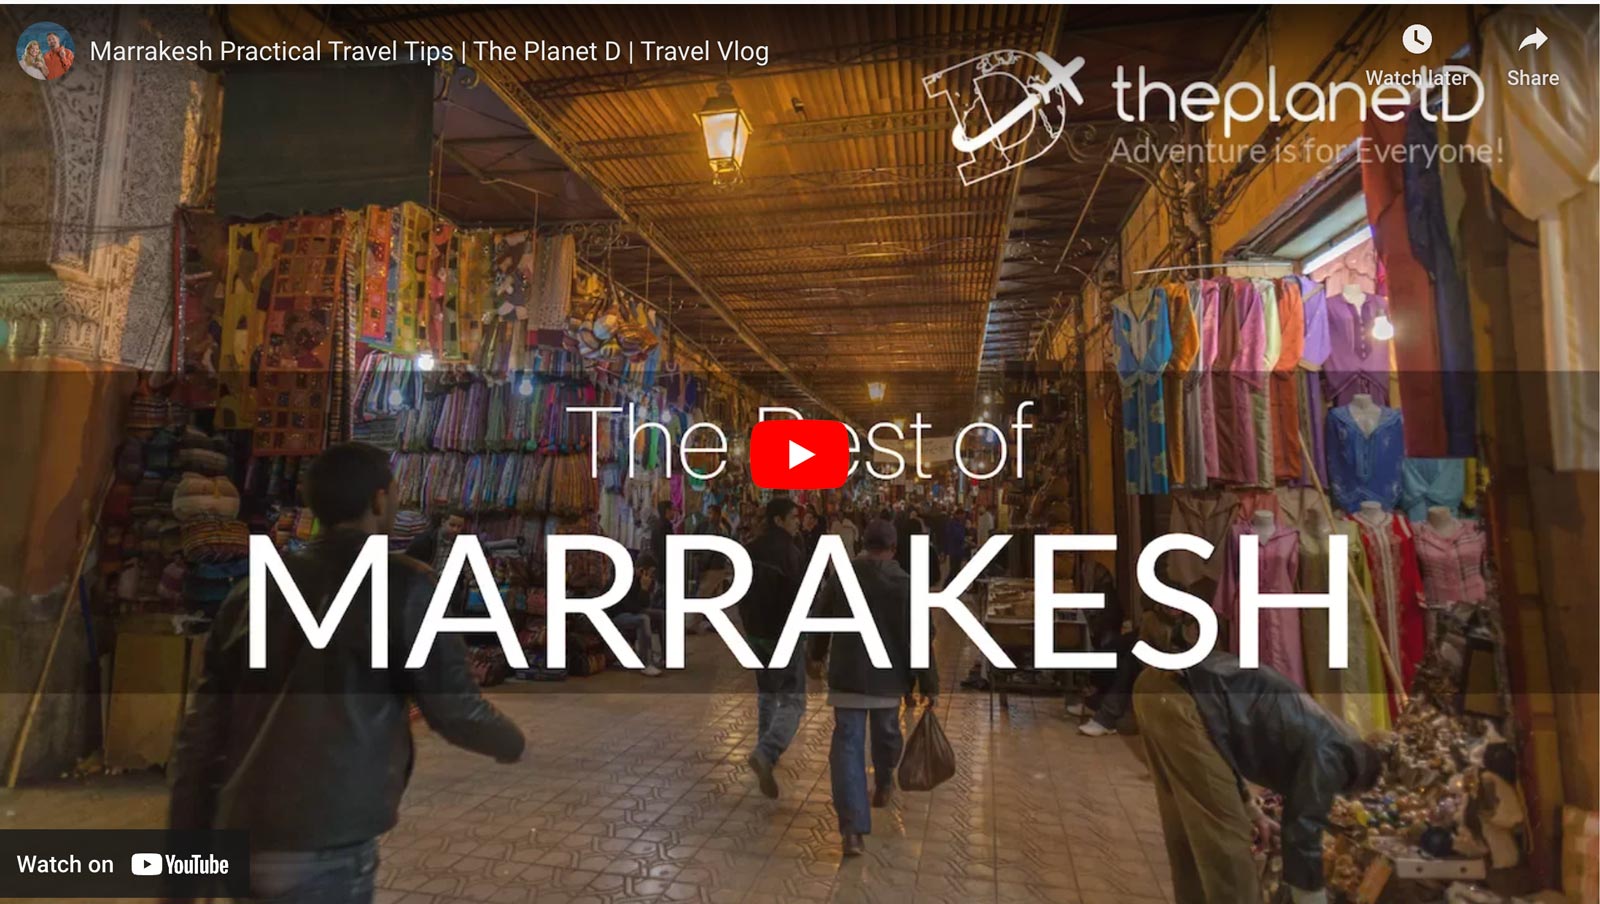 things to do in marrakech video travel tips